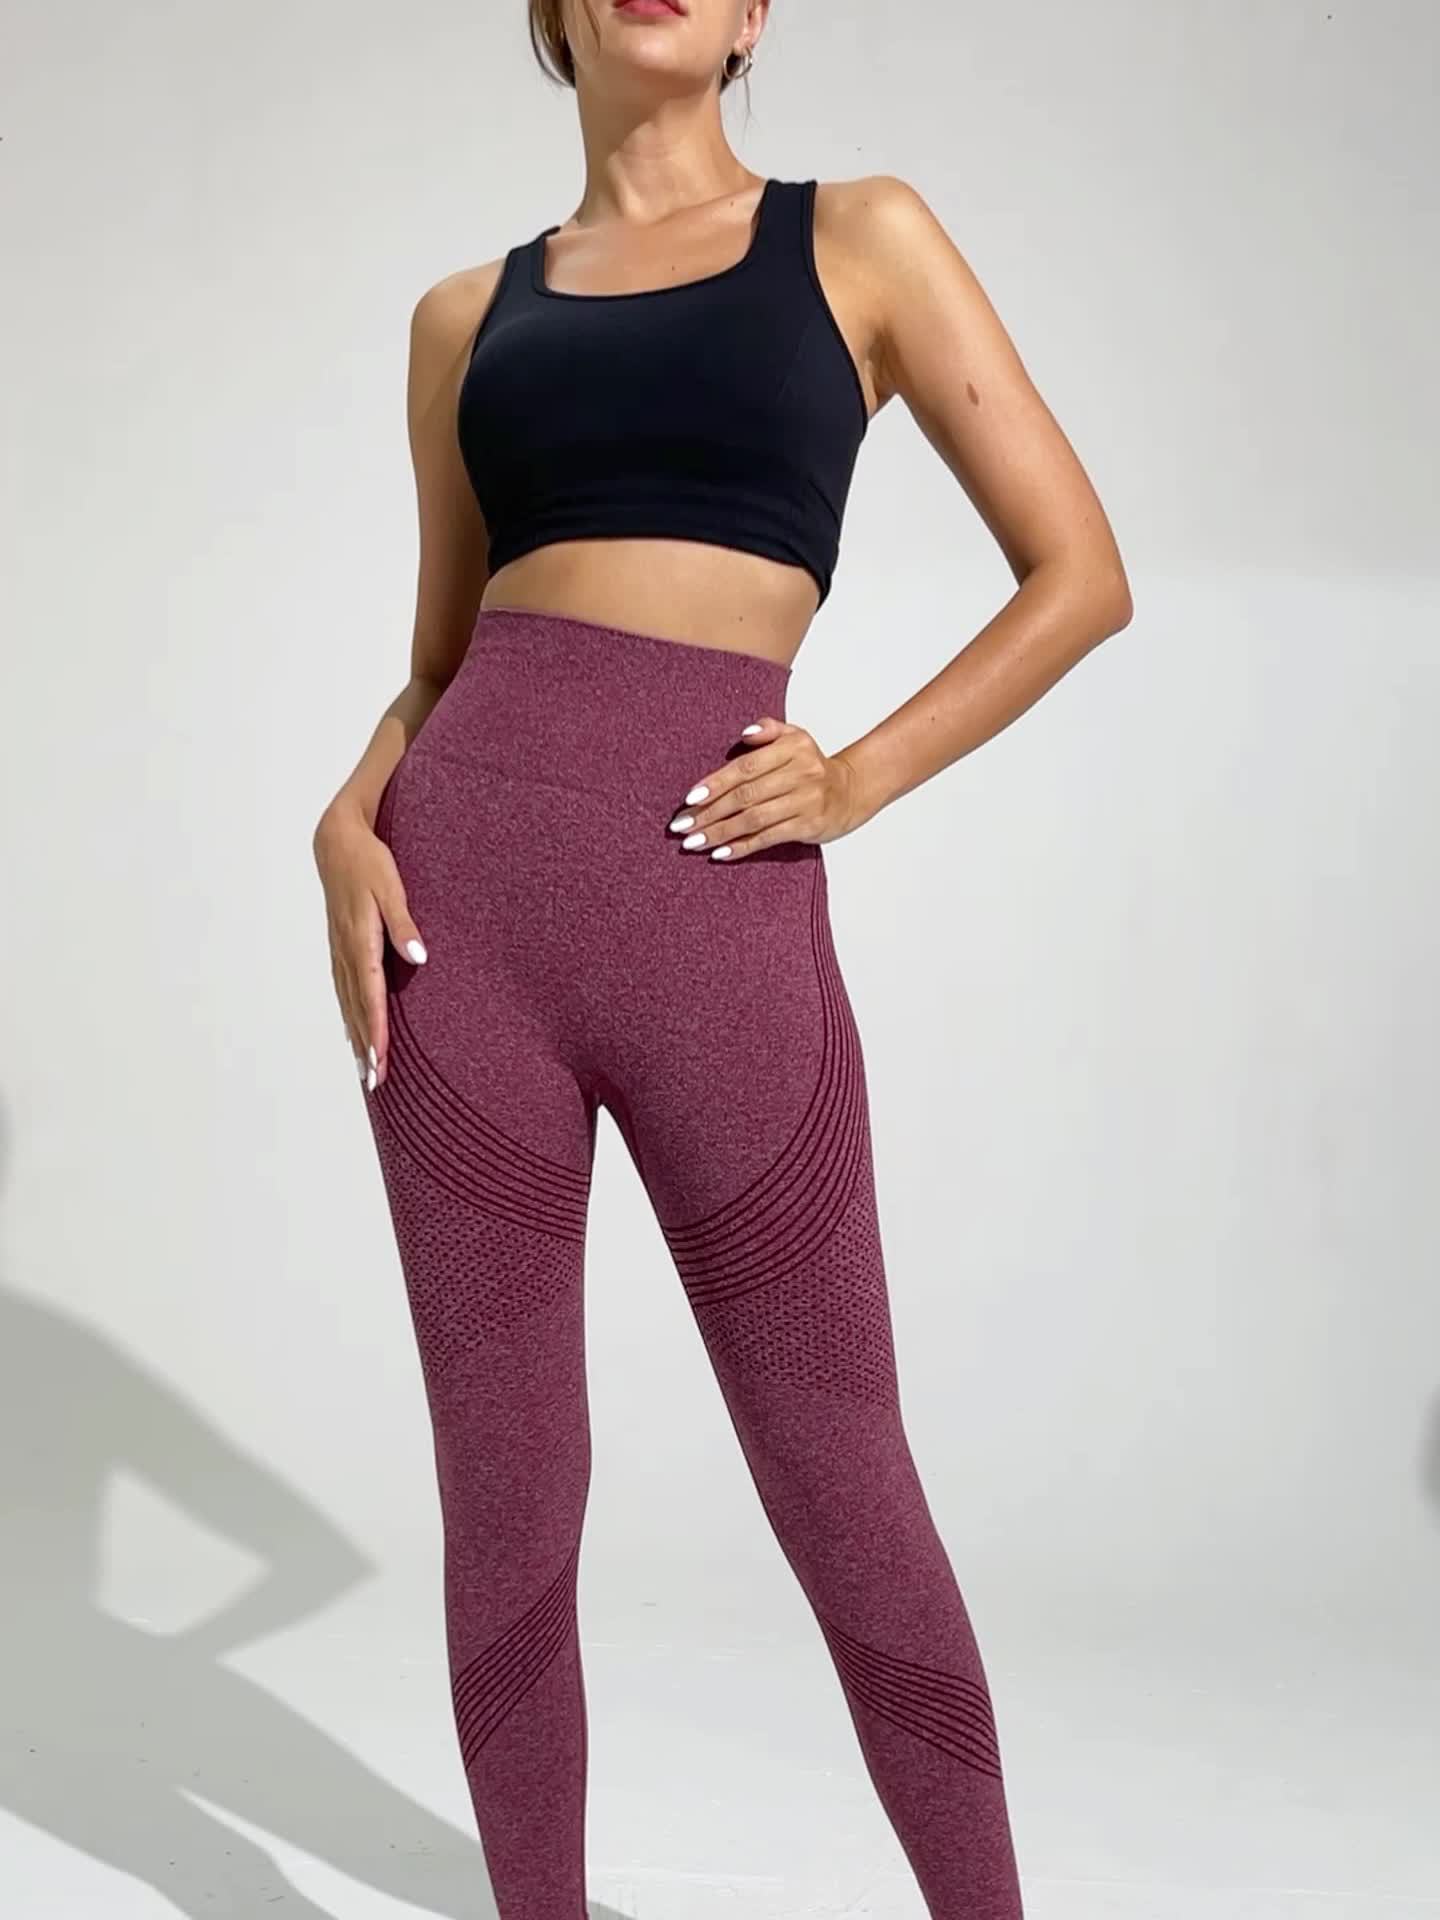 Fabletics Solid Green Leggings Size M - 46% off